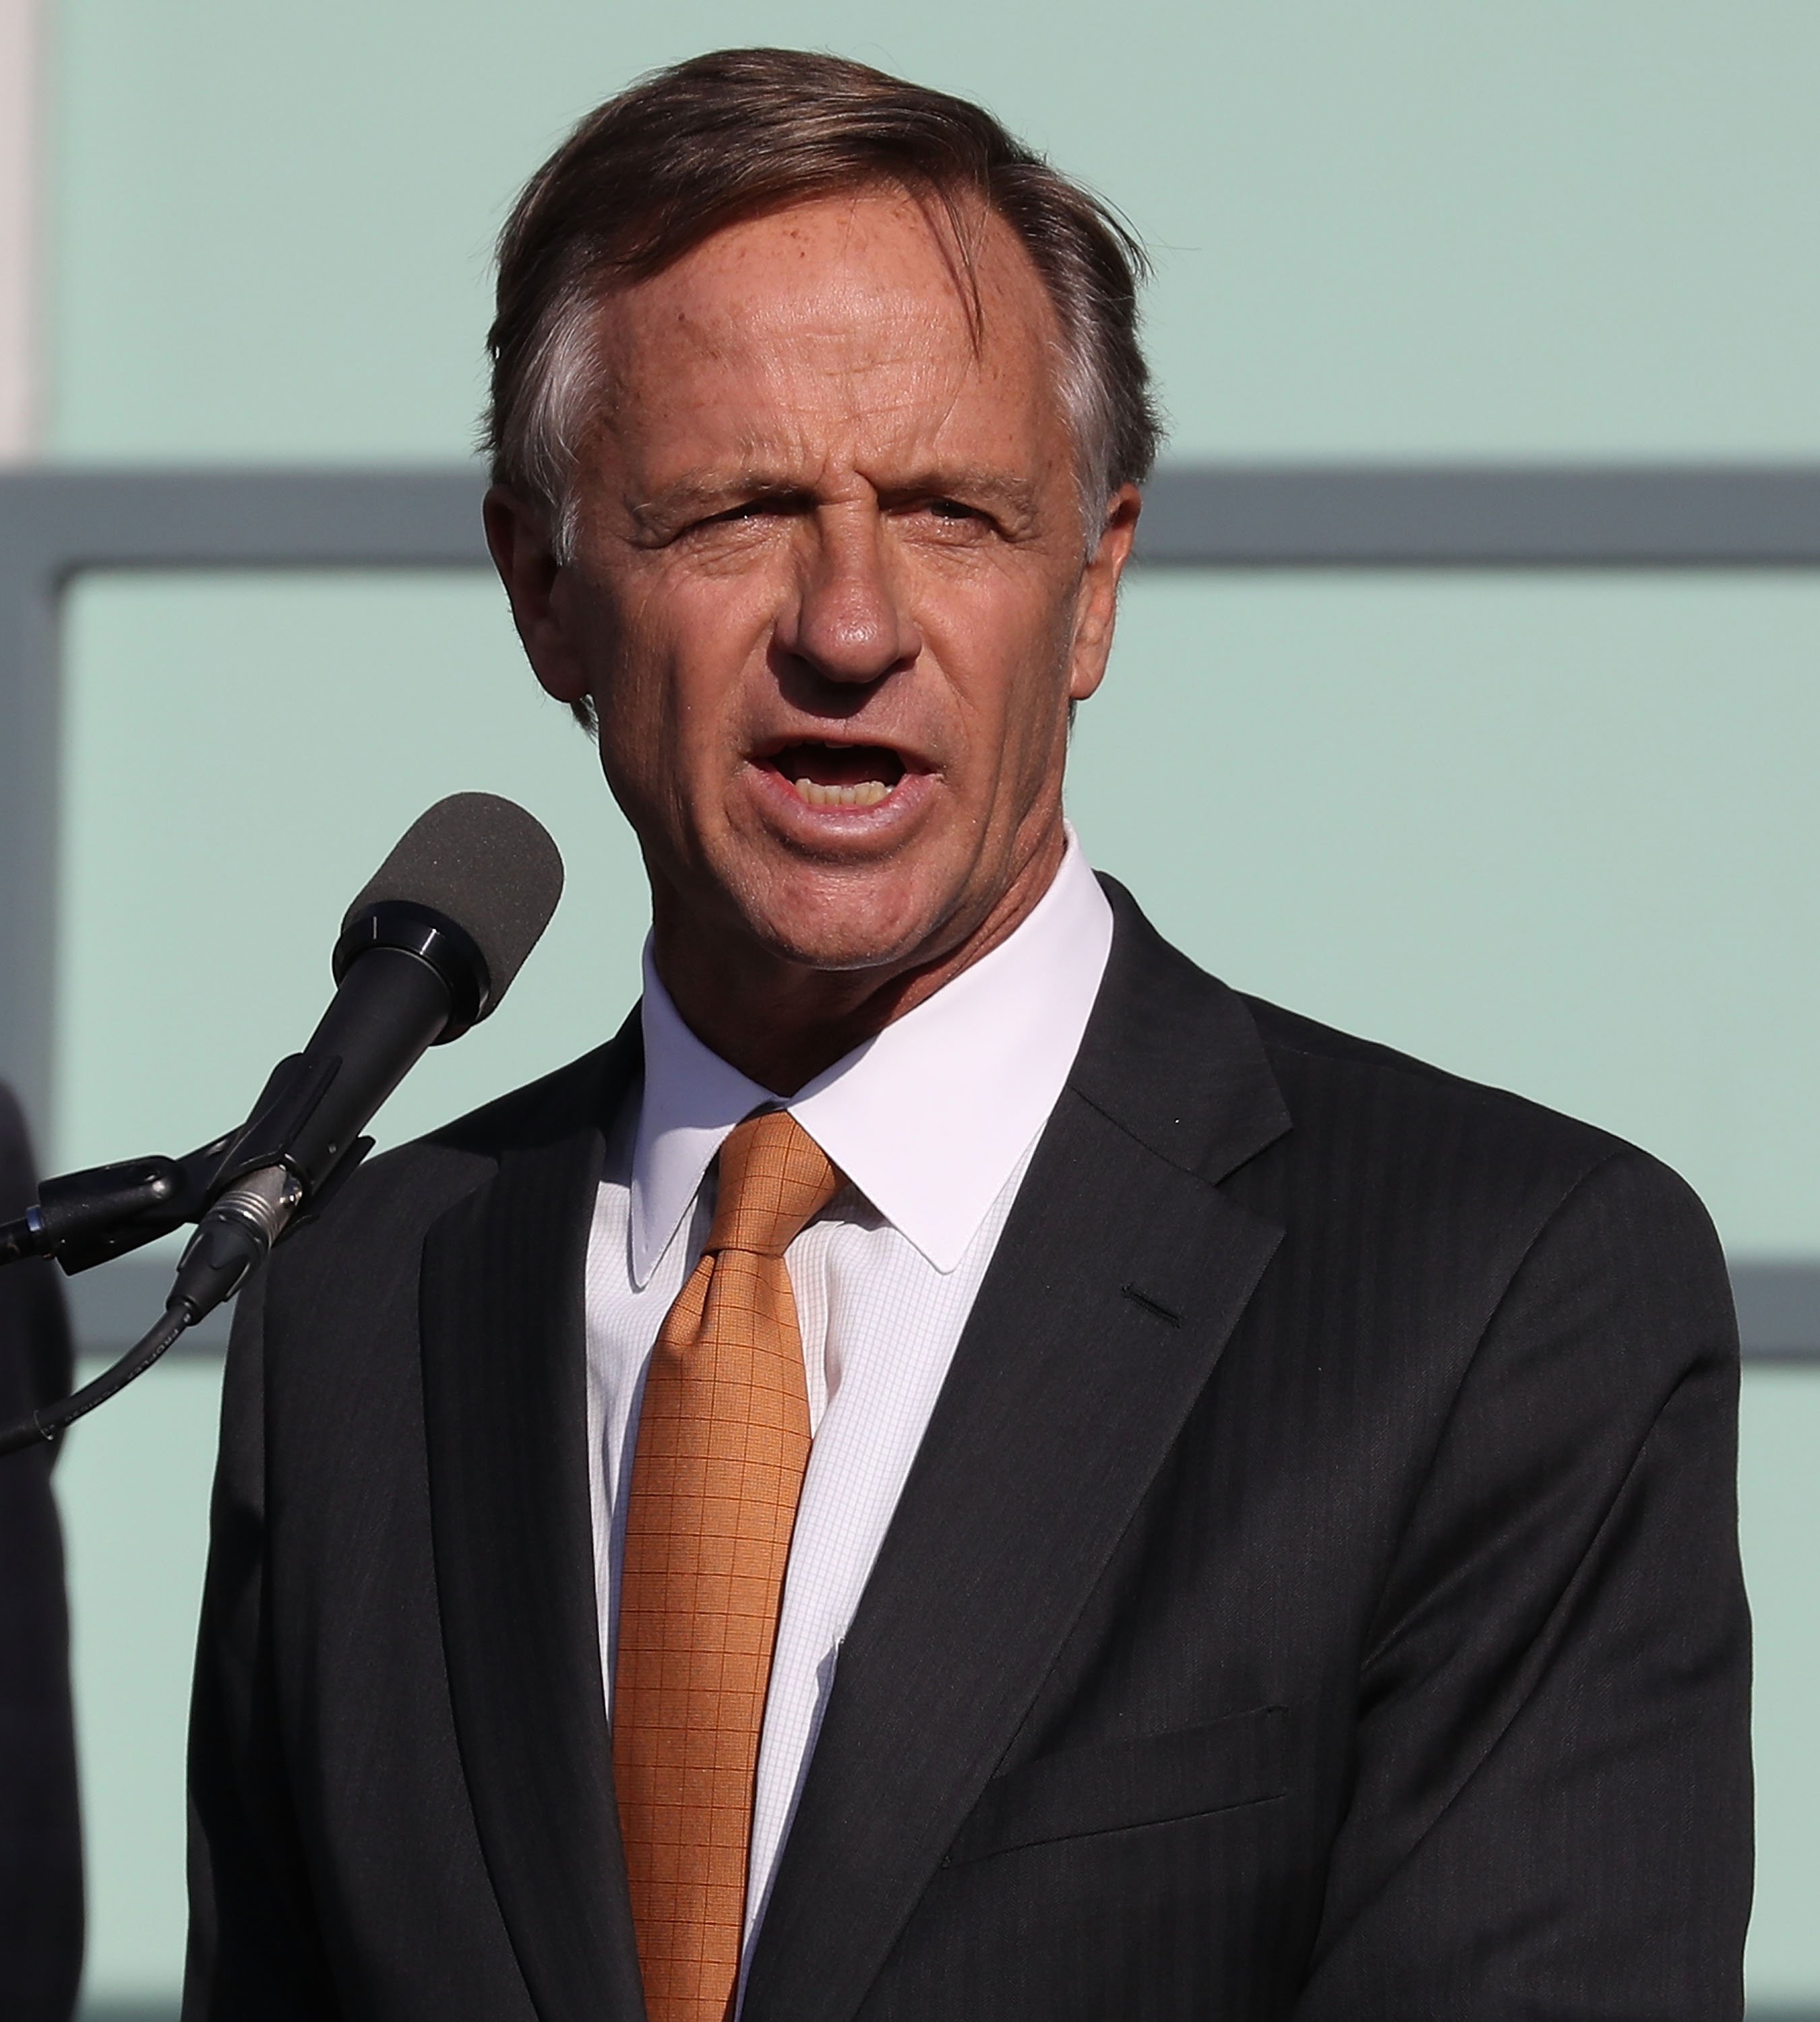 Tennessee Governor Bill Haslam speaks during a ceremony at the Lorraine Motel, where Dr. Martin Luther King, Jr. was assassinated 50 years ago, April 4, 2018 in Memphis, Tennessee. (Photo by Joe Raedle/Getty Images)